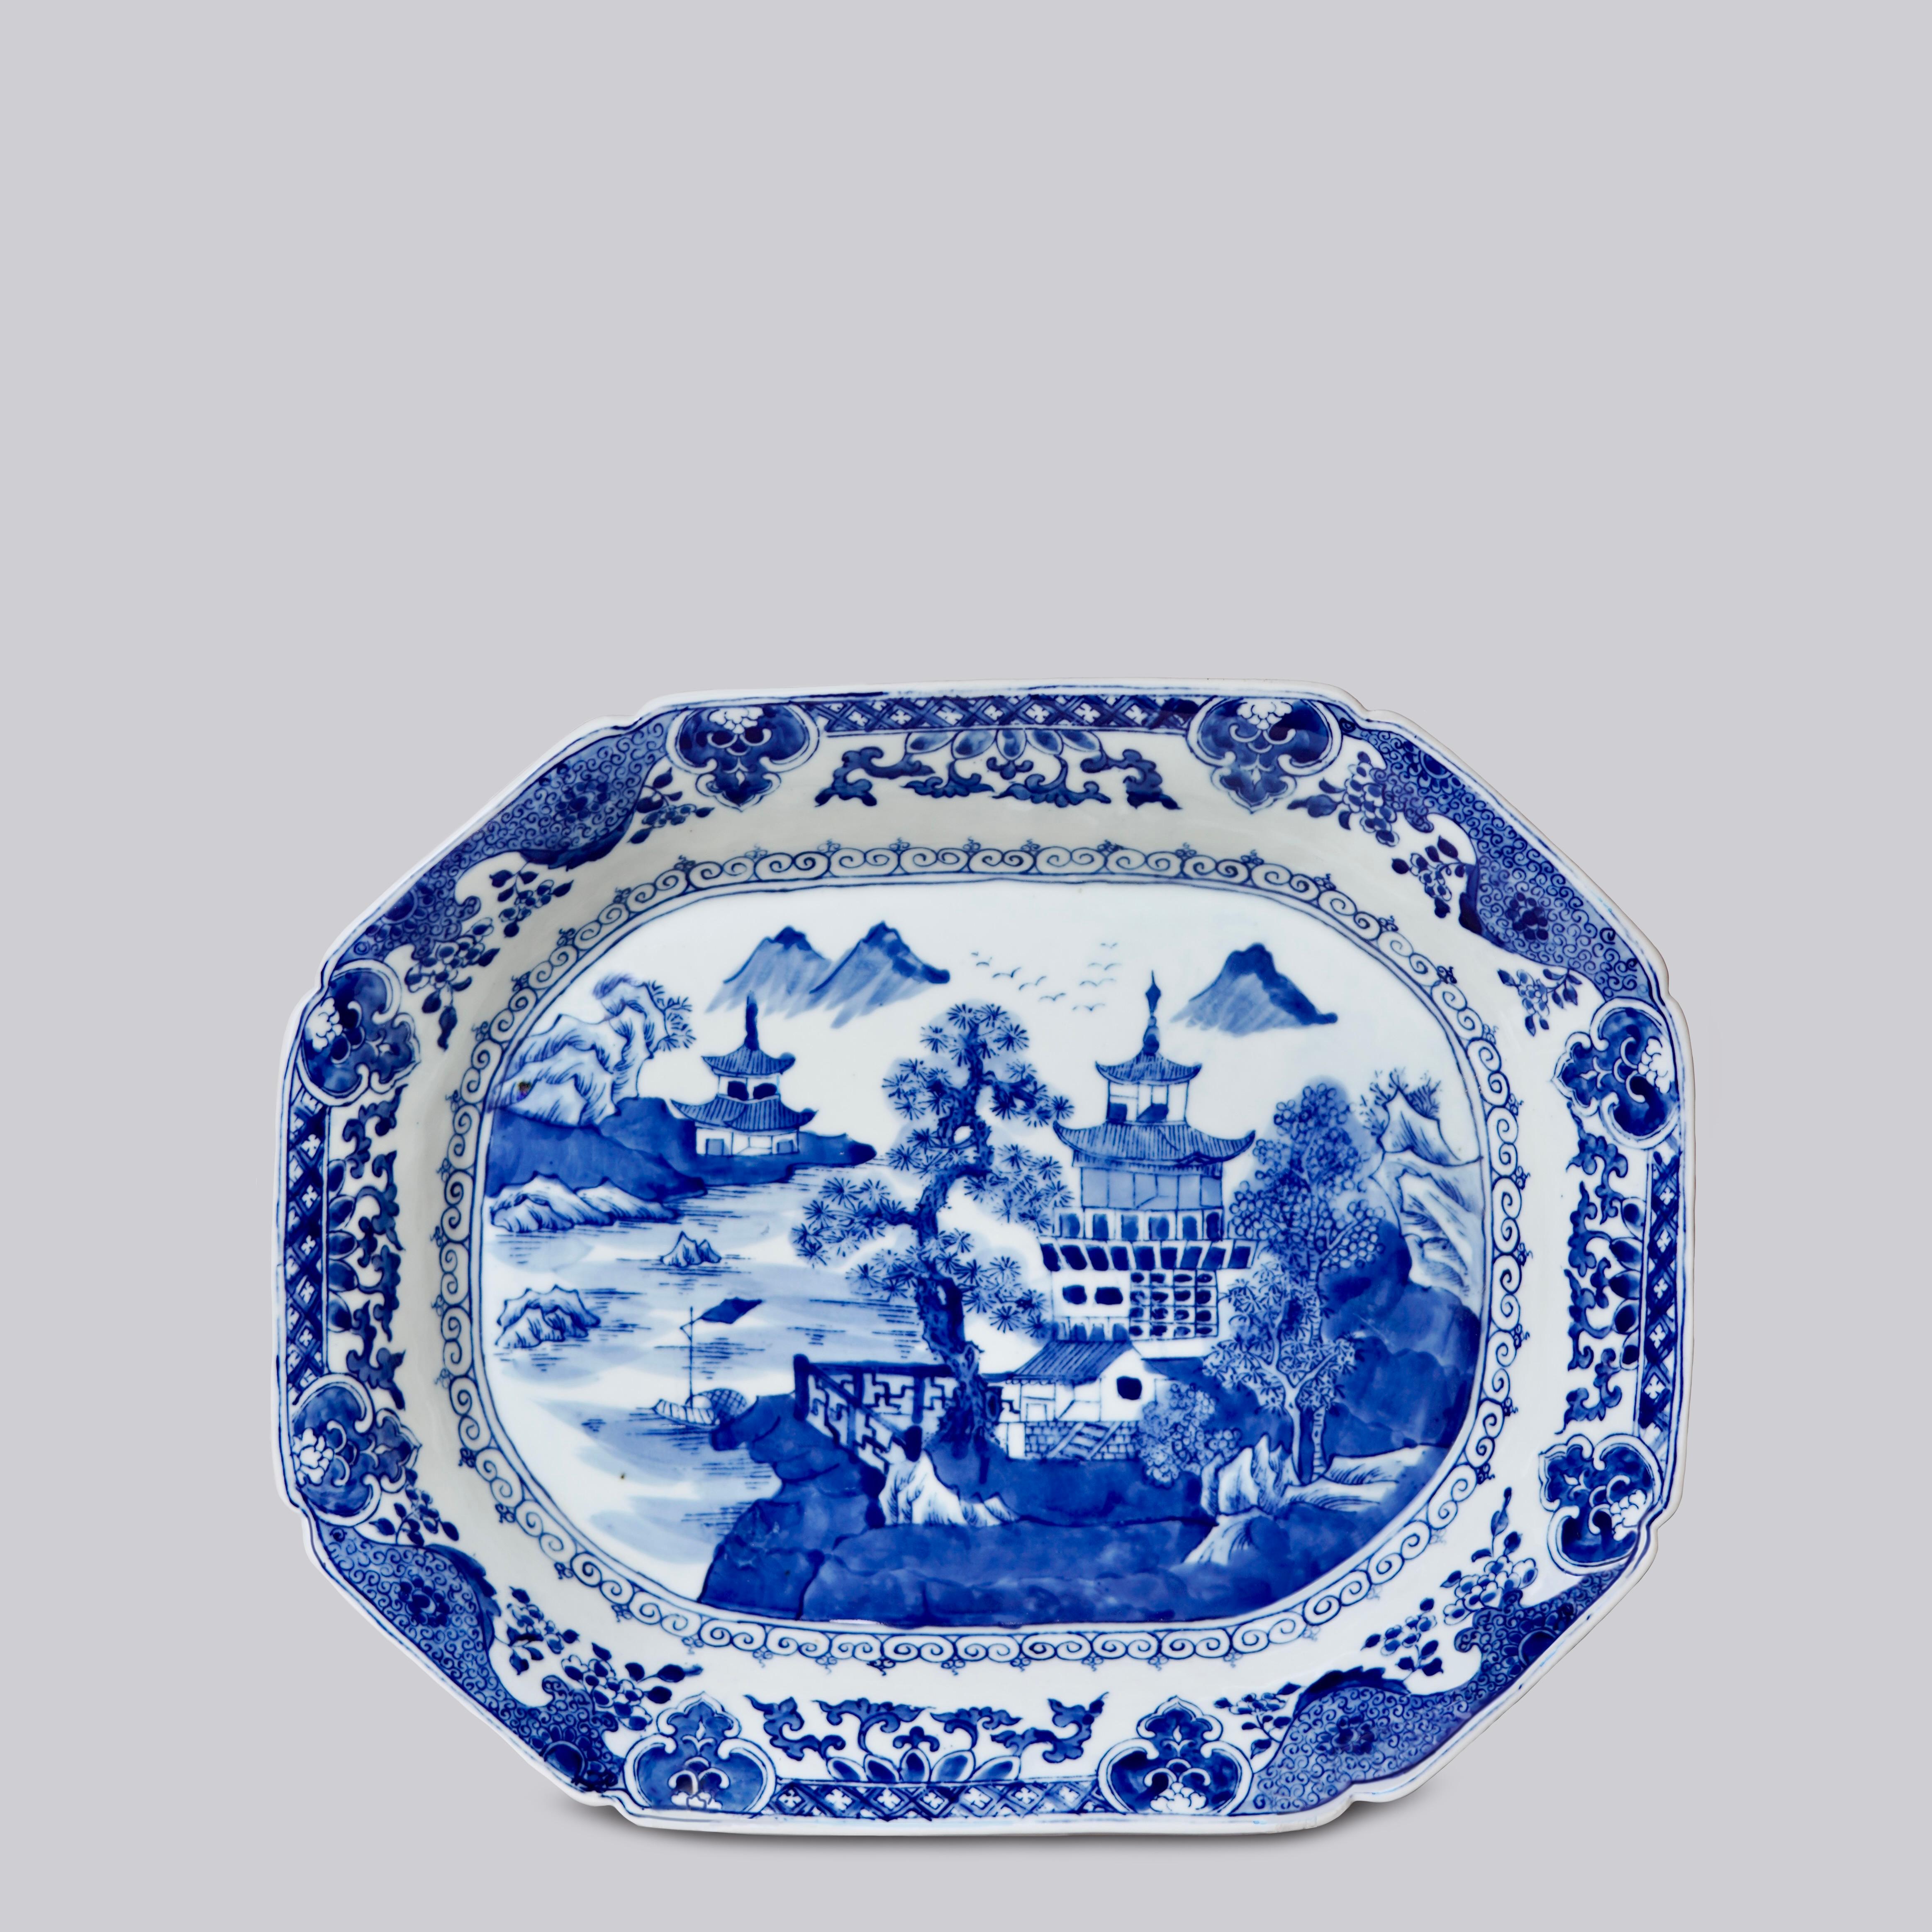 This platter is a traditional style from Jingdezhen, a town long distinguished by imperial patronage. The Willow Ware pattern is a beloved traditional Chinese style that was interpreted and reinterpreted by European potteries and is still popular